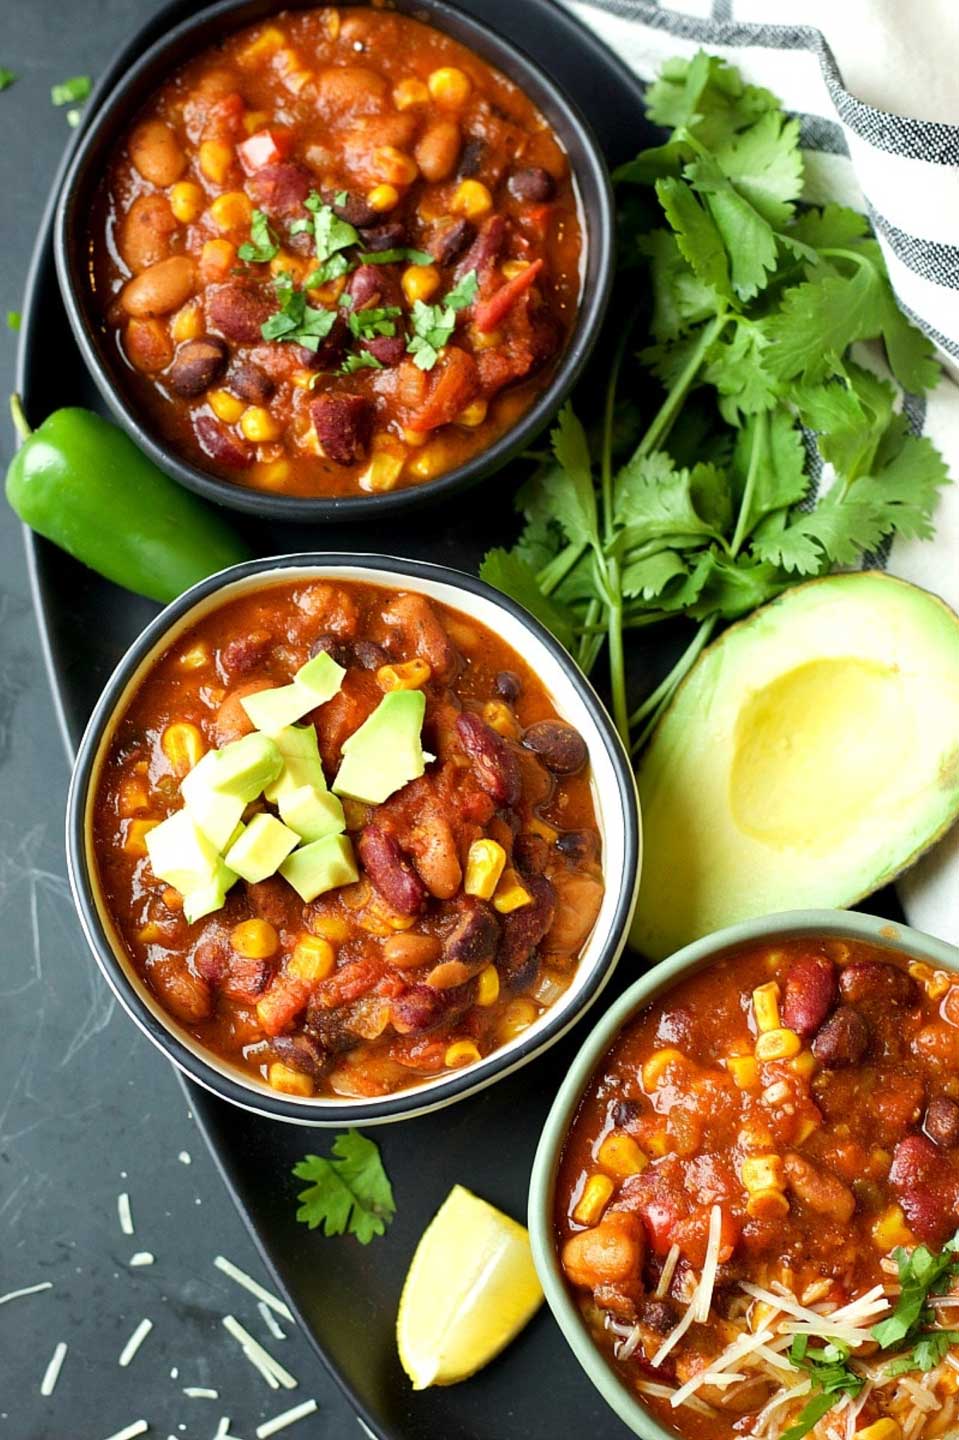 Vegetarian chili loaded with nutritious veggies – YUM! You’ve gotta try this Instant Pot Supersonic Veggie Chili from Silvia at Garden in the Kitchen … and then check out our whole list of 17 Instant Pot Chilis for even more scrumptious ideas!